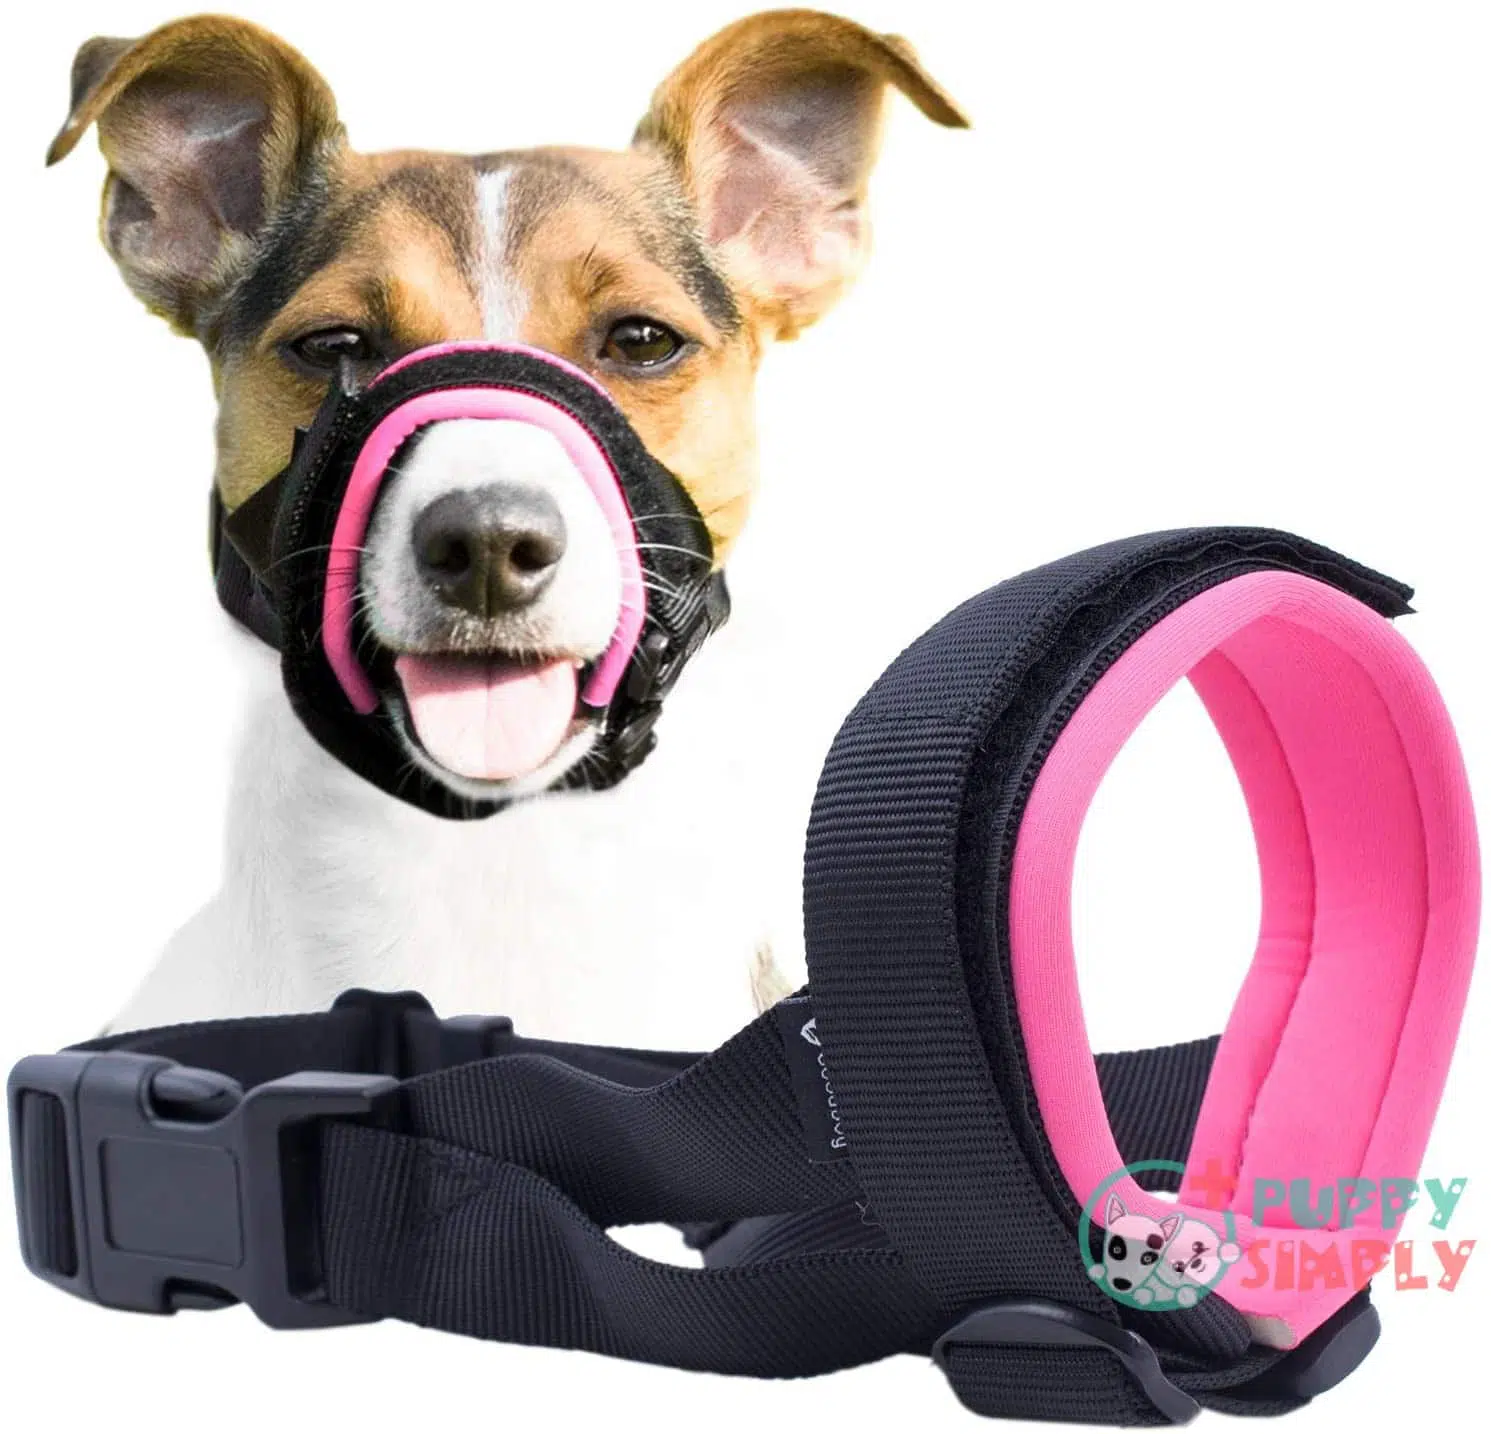 Gentle Muzzle Guard for Dogs